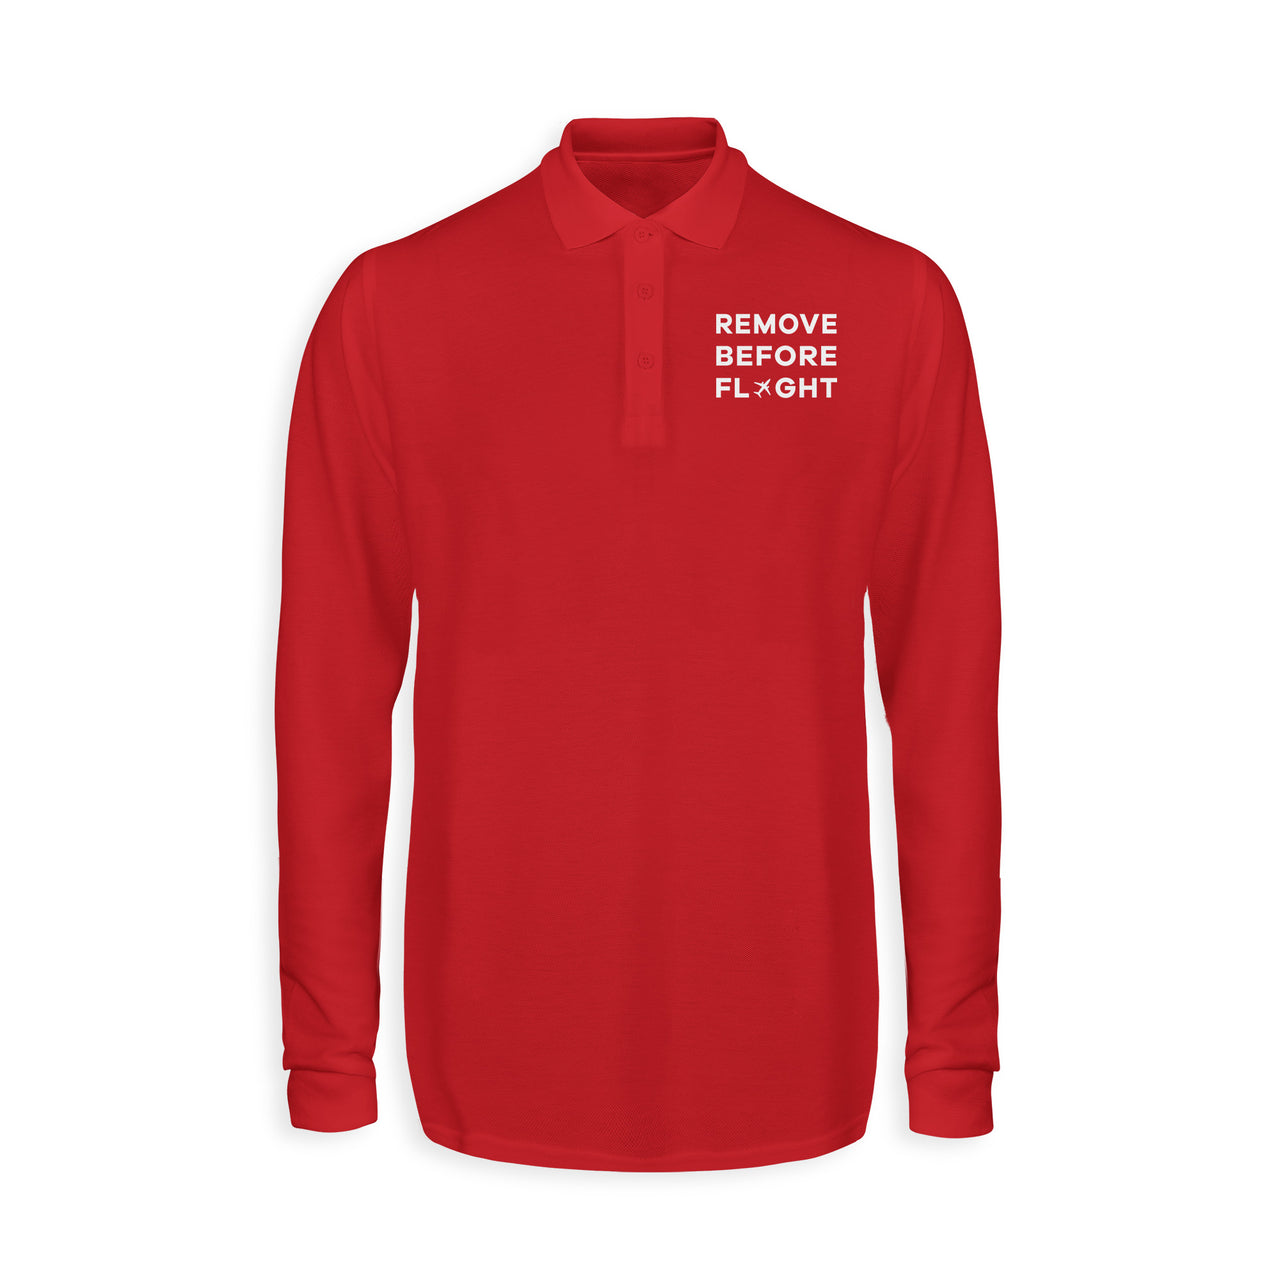 Remove Before Flight Designed Long Sleeve Polo T-Shirts